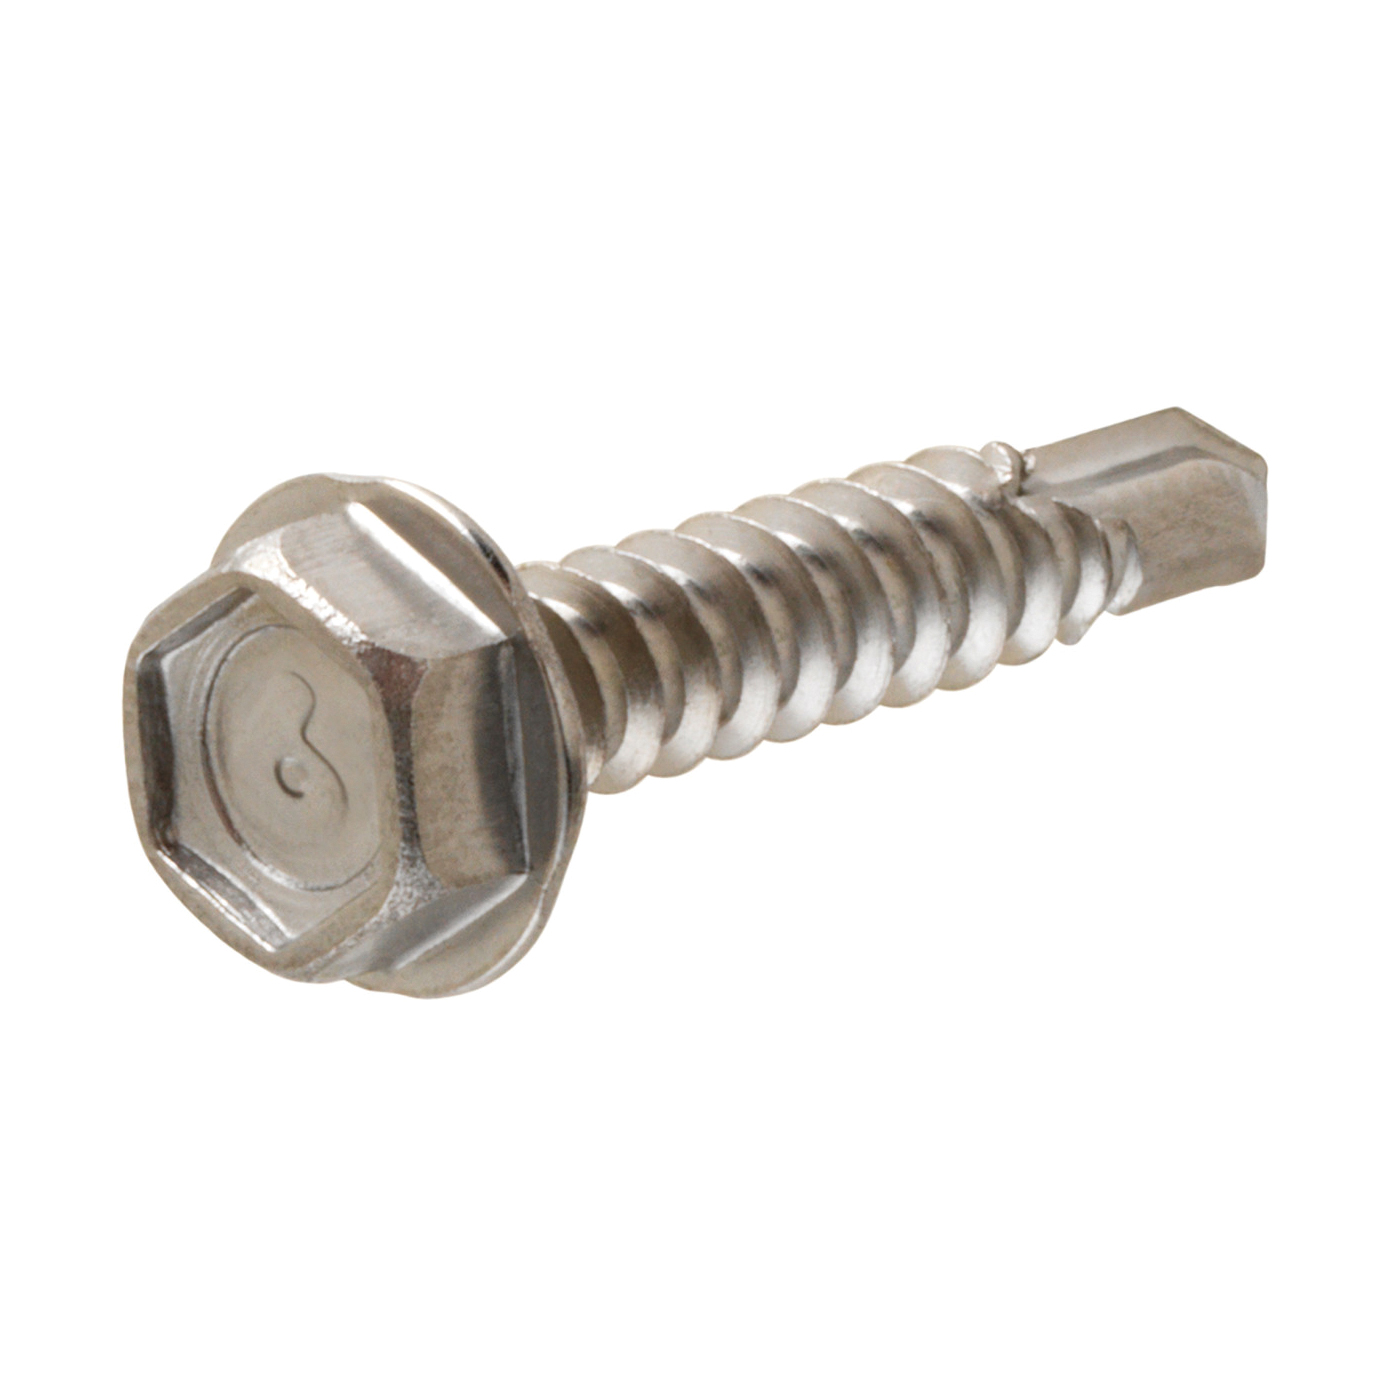 881844 Screw, #14 Thread, 3/4 in L, Coarse Thread, Washer Head, Hex Drive, Self-Drilling Point, Stainless Steel